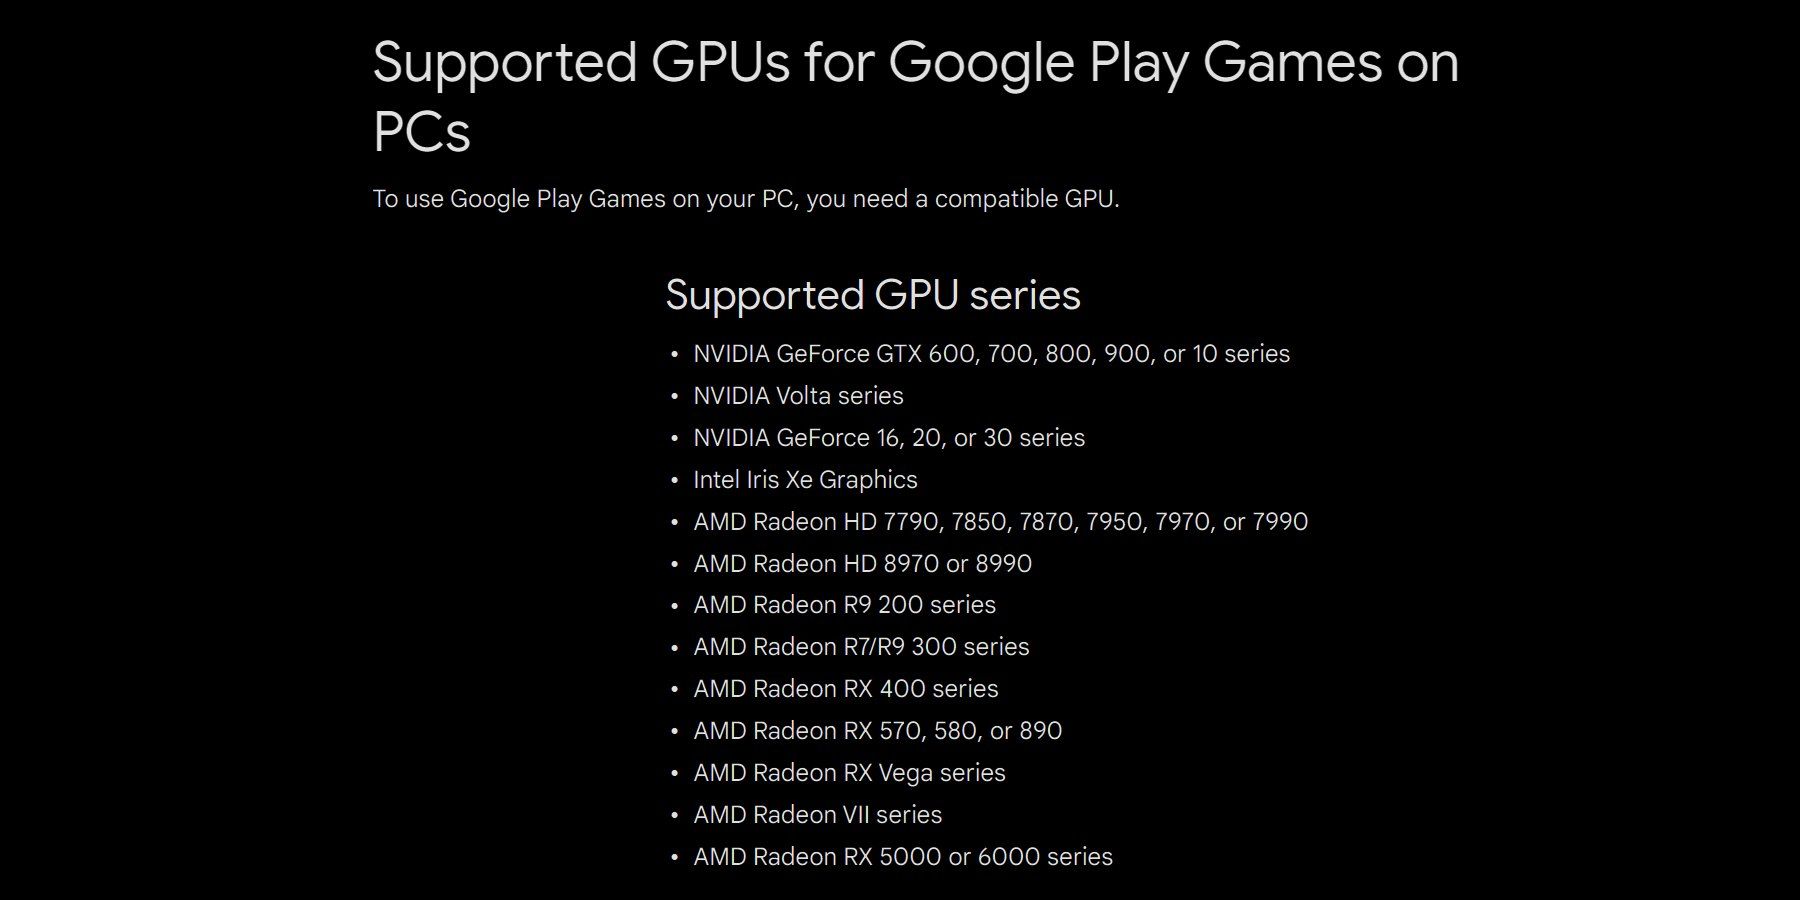 Google Play Games on PC graphics requirements.